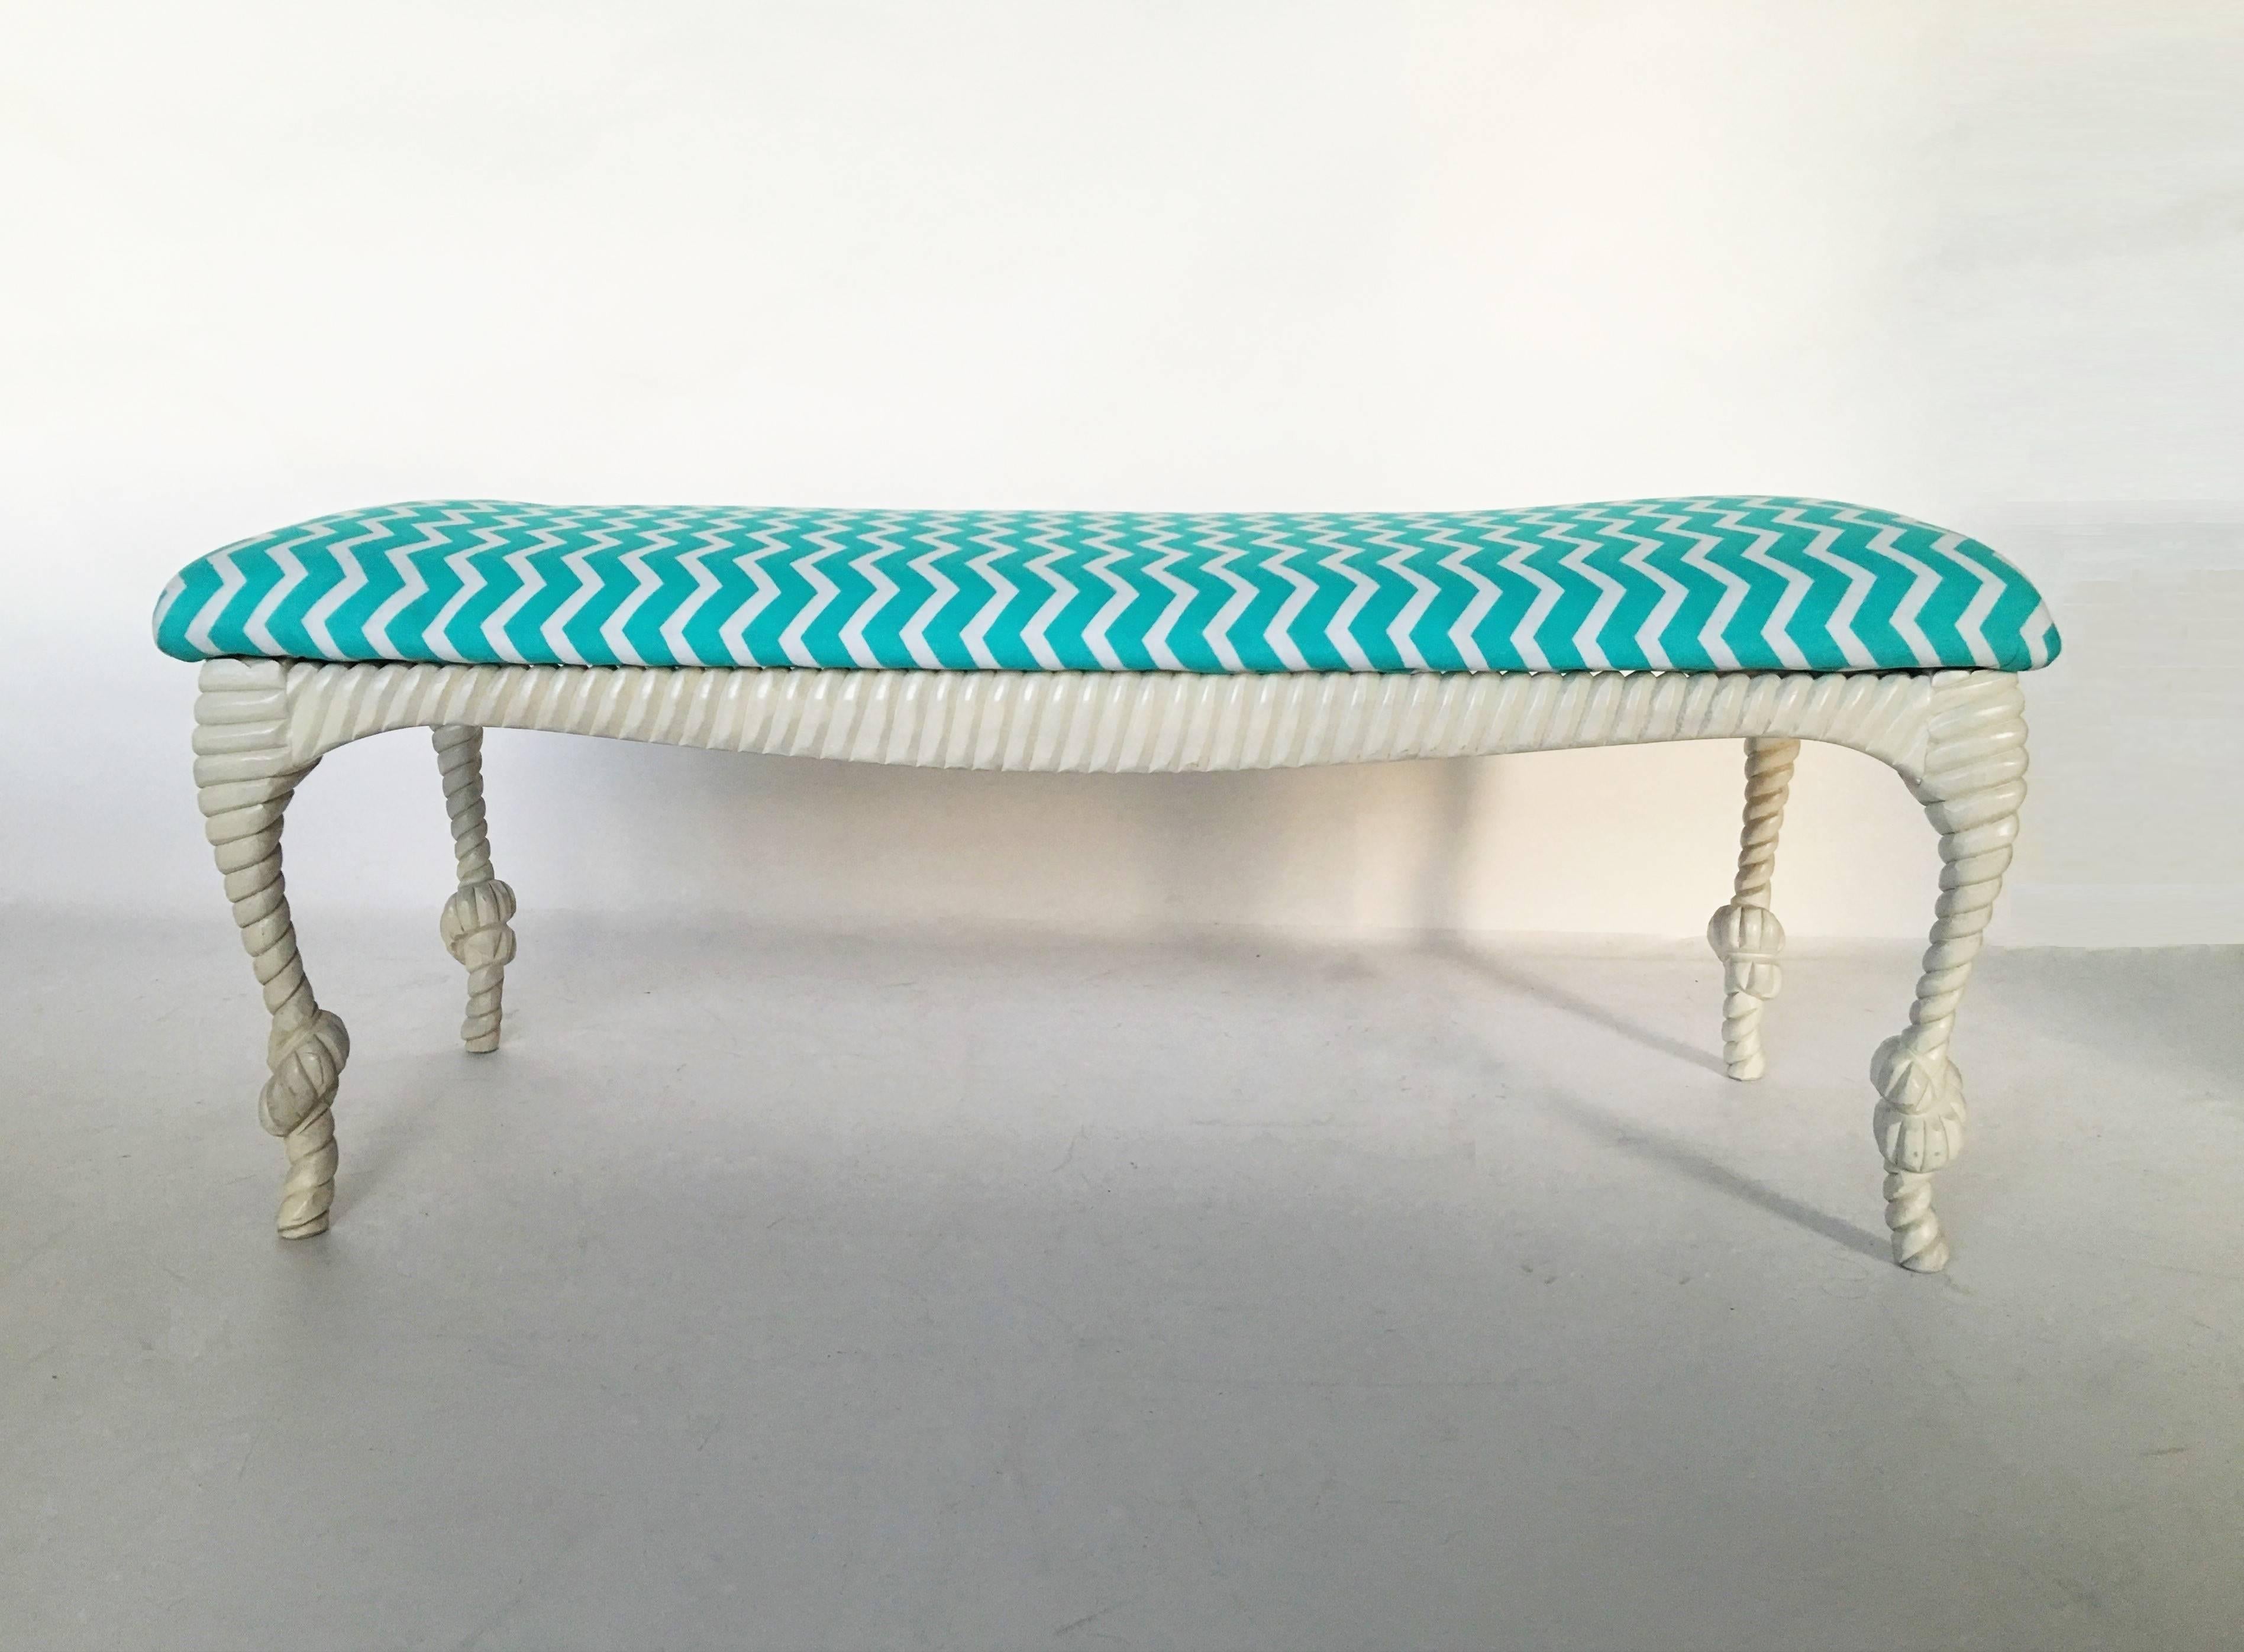 Stylish Dorothy Draper style carved rope-twist bench; upholstered seat above a rope-twist carved apron raised on similarly carved cabriole legs. Can be re-upholstered. Call for more information.